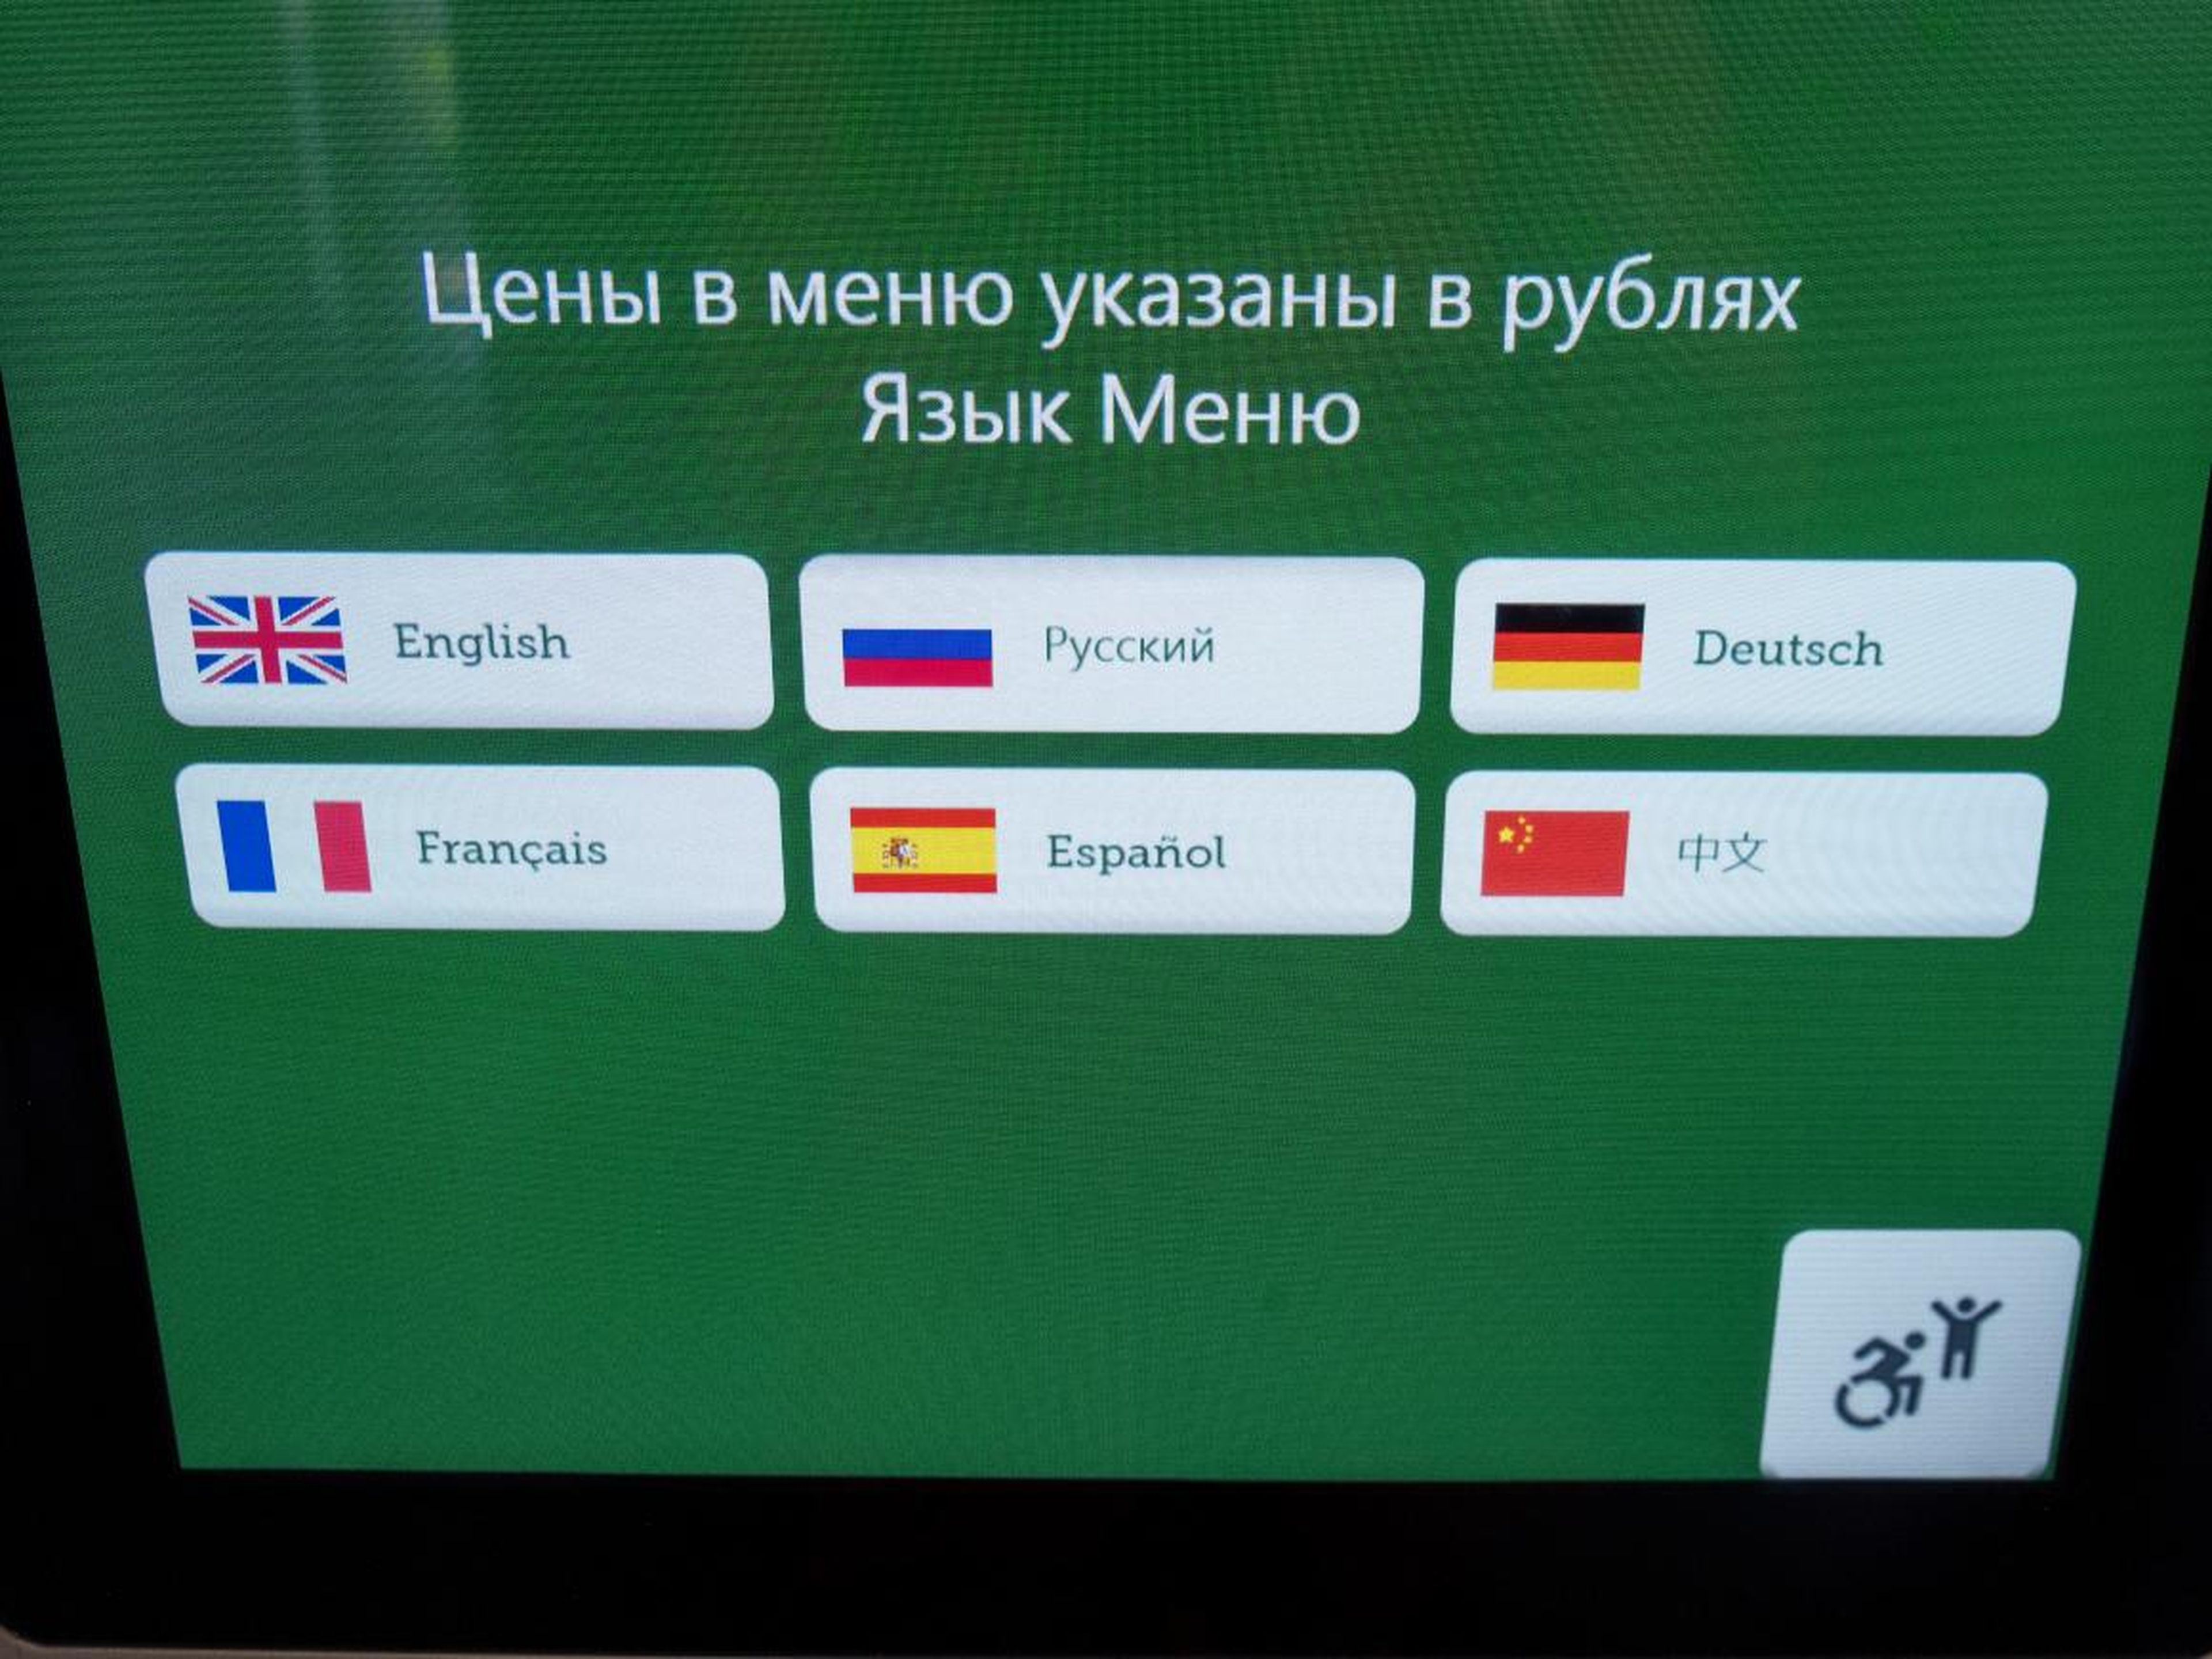 I made my way over to an ordering kiosk and was relieved to see it could be operated in English and several other languages.